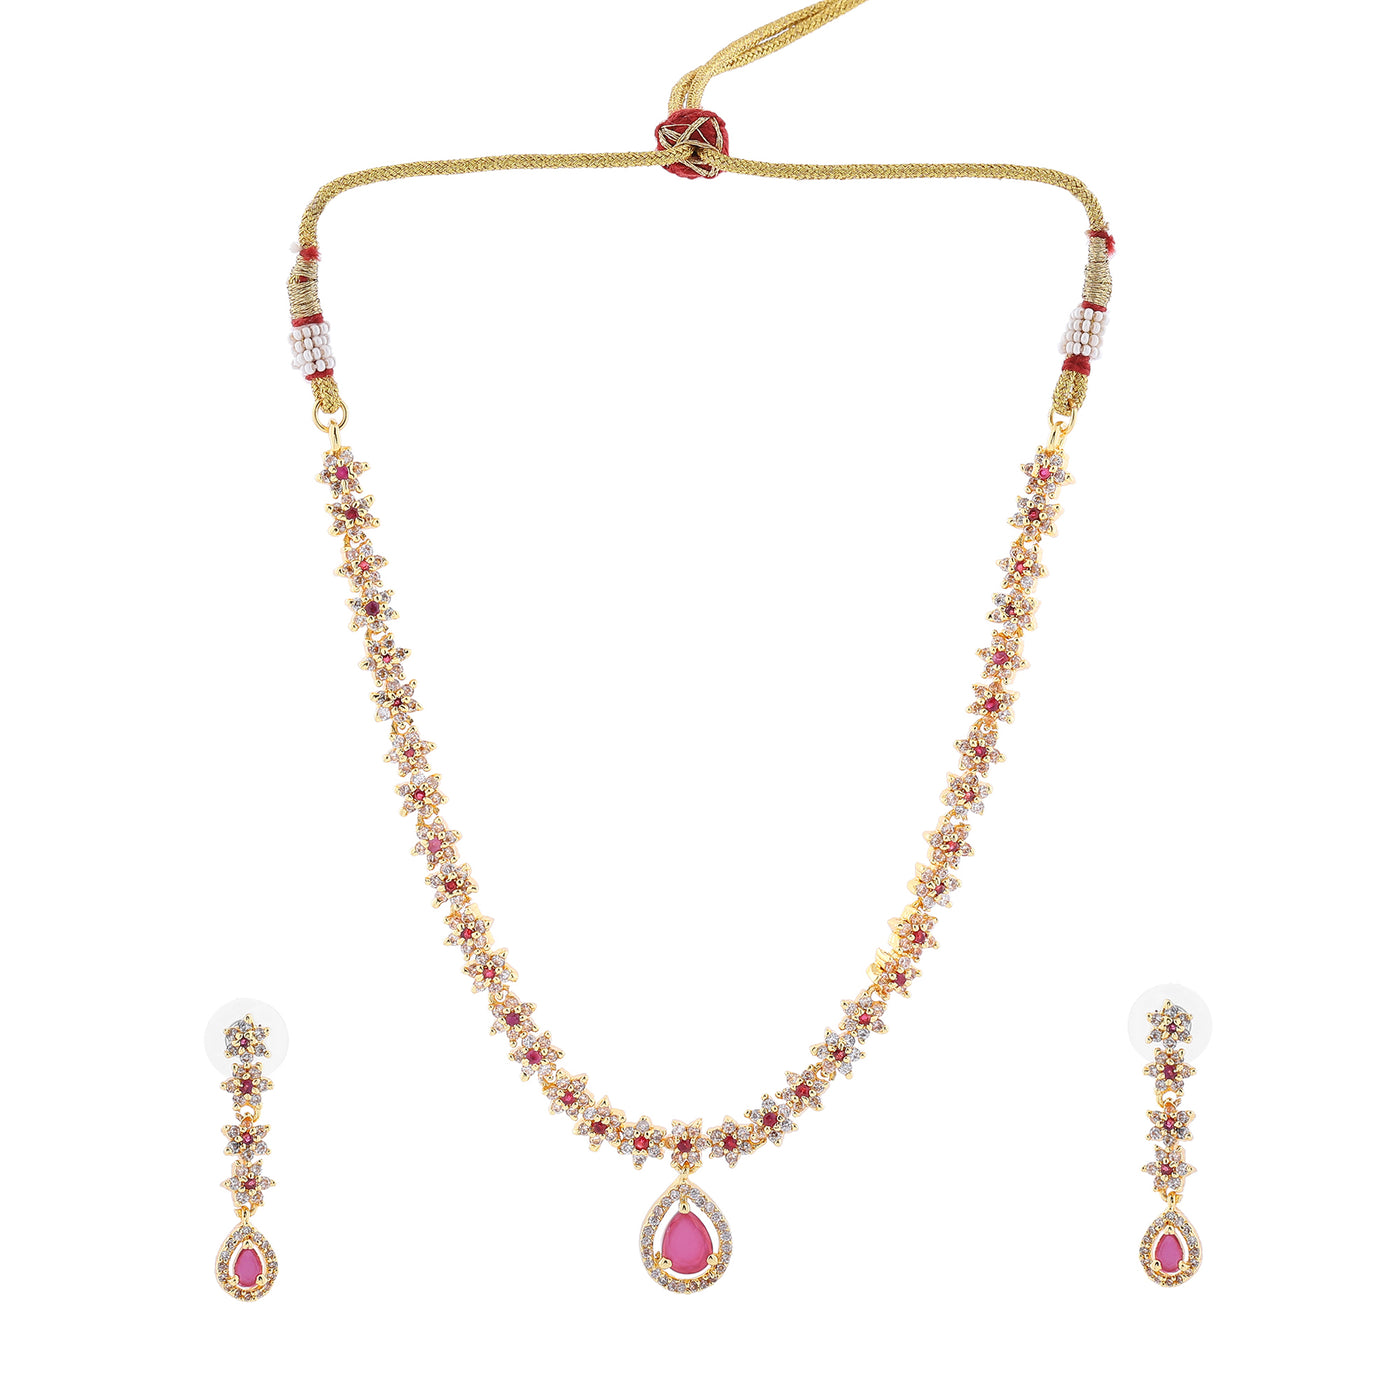 Estele Gold Plated CZ Floral Line Bridal Necklace Set with Ruby Crystals for Women